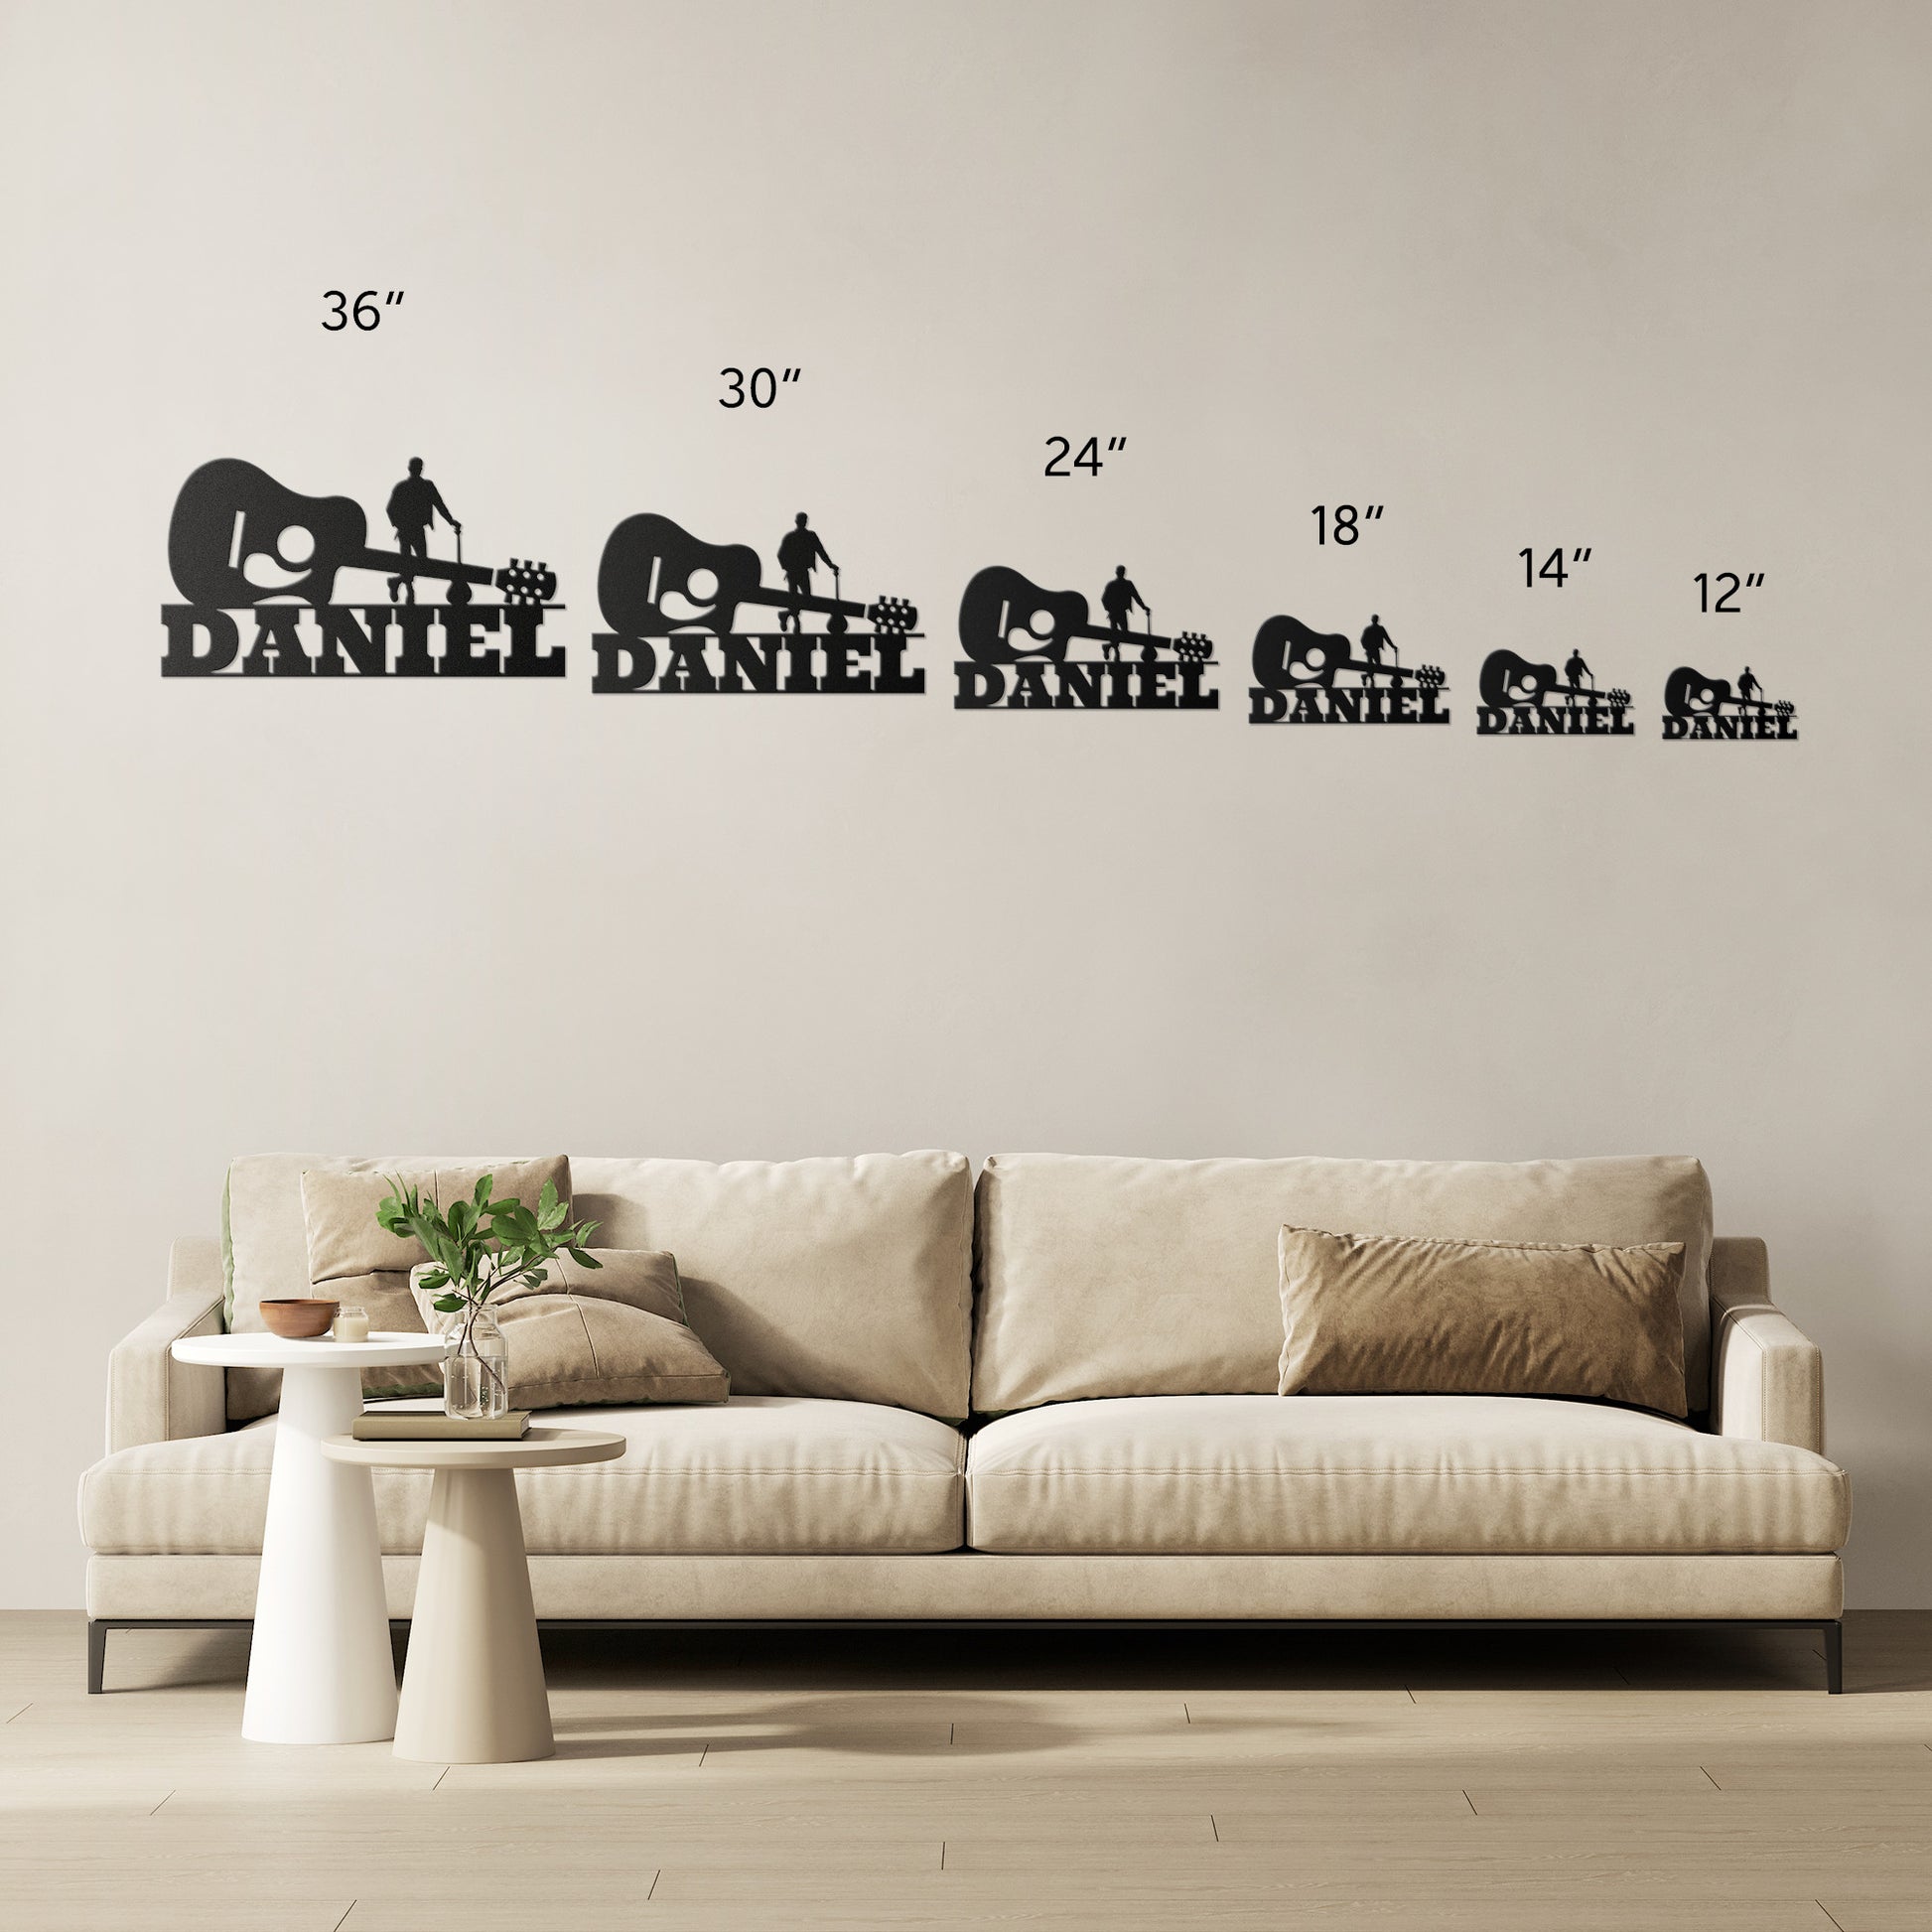 Personalized wall decals depicting the name "Daniel" in various sizes with a cute elephant and Acoustic Guitar with Guitarist Wall Sign Custom Name design, showcased above a sofa for scale reference.